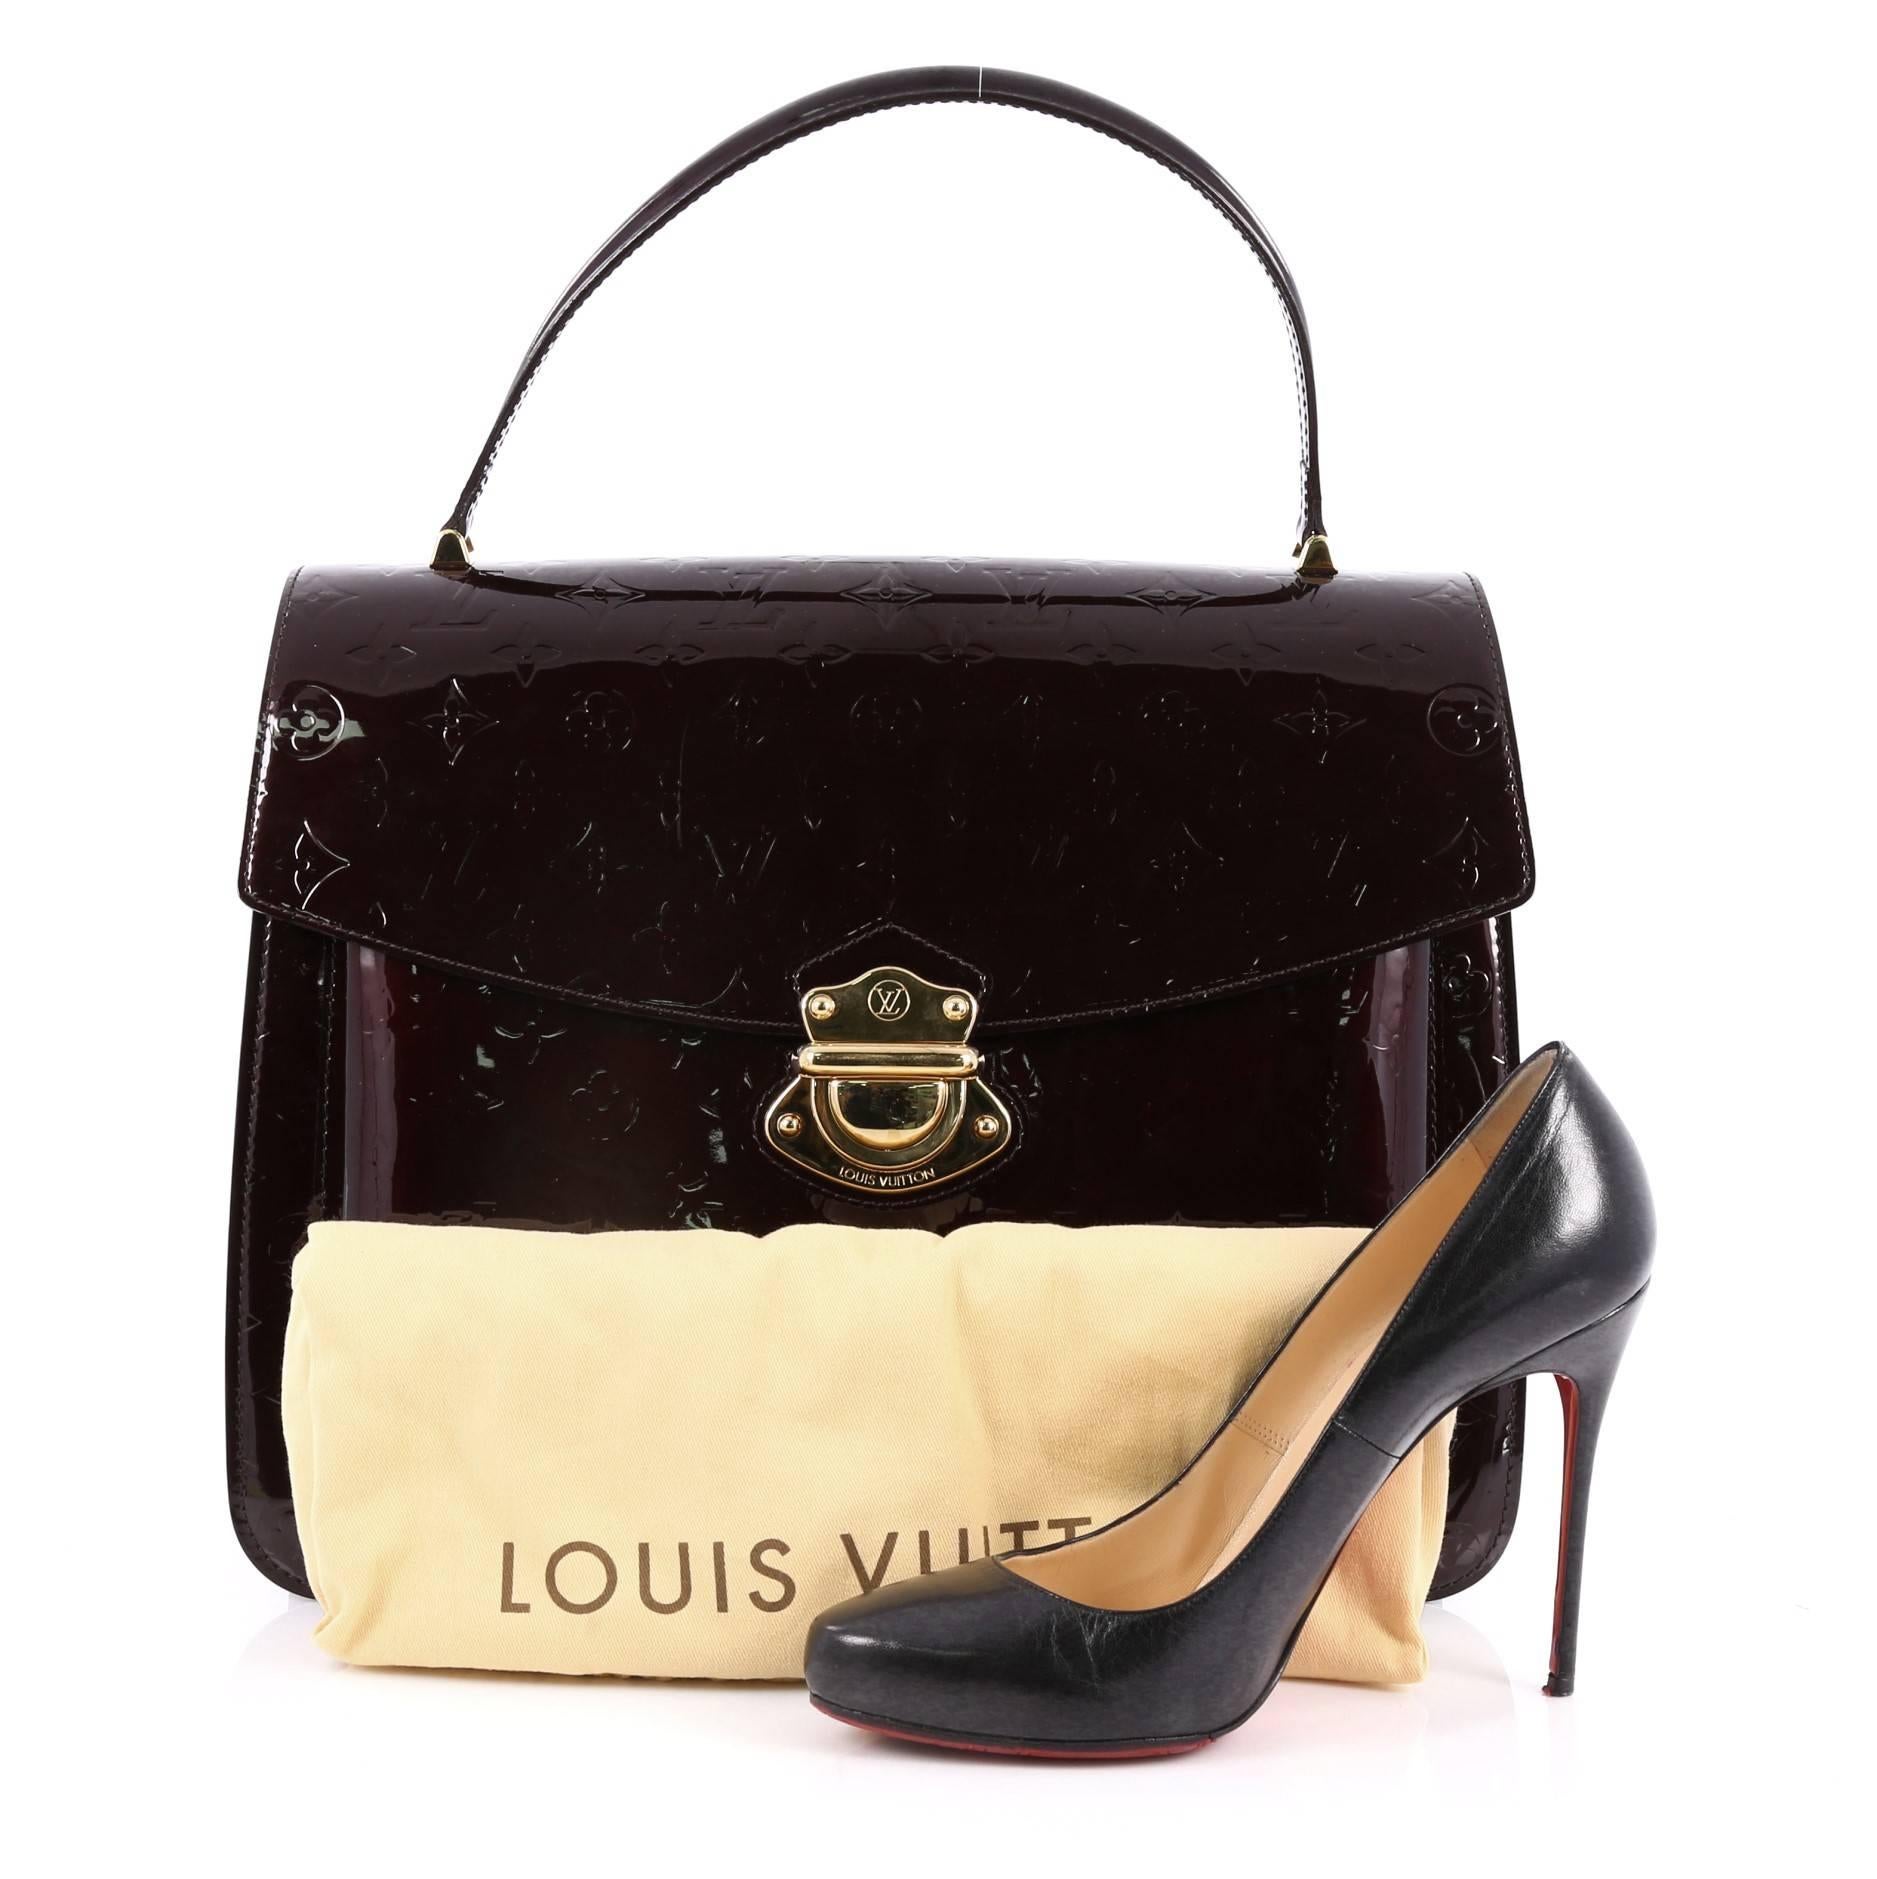 This authentic Louis Vuitton Romaine Handbag Monogram Vernis is a retro chic bag showcasing a timeless design made for the modern woman. Crafted from amarante red monogram vernis, this luxurious tote features a short top handle, exterior zip back